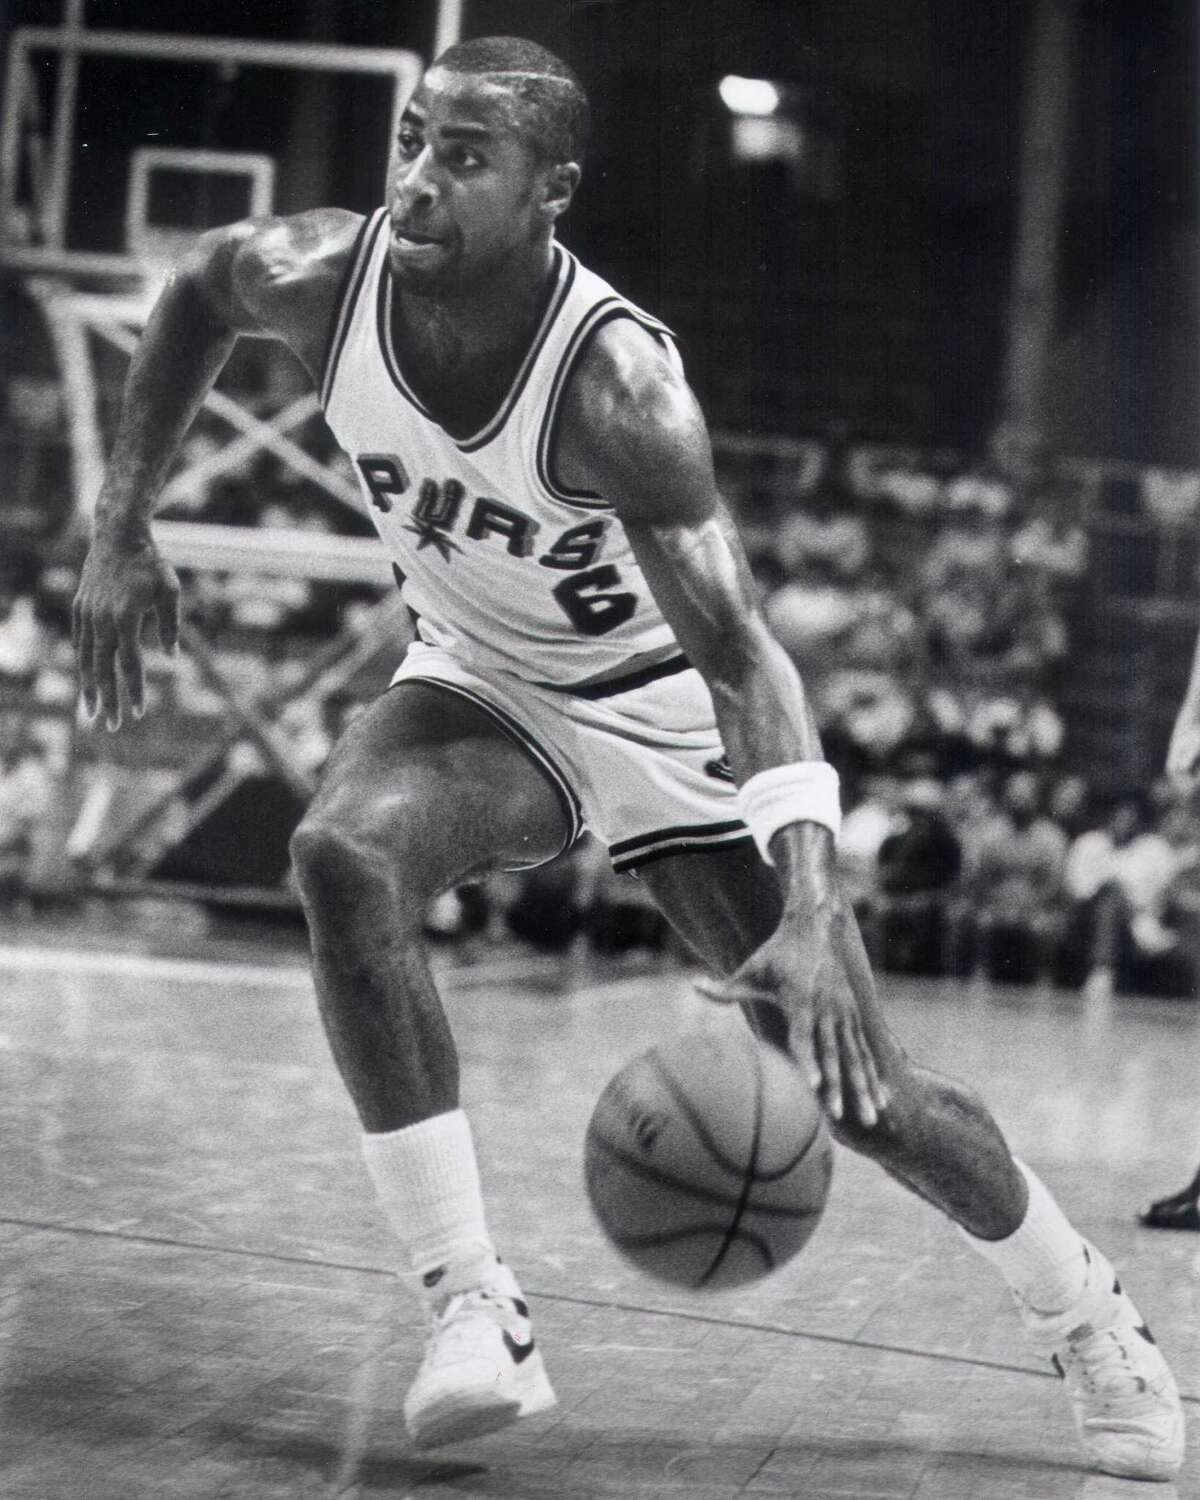 Alfredrick Hughes averaged just 5.2 points per game in his lone season with the Spurs.